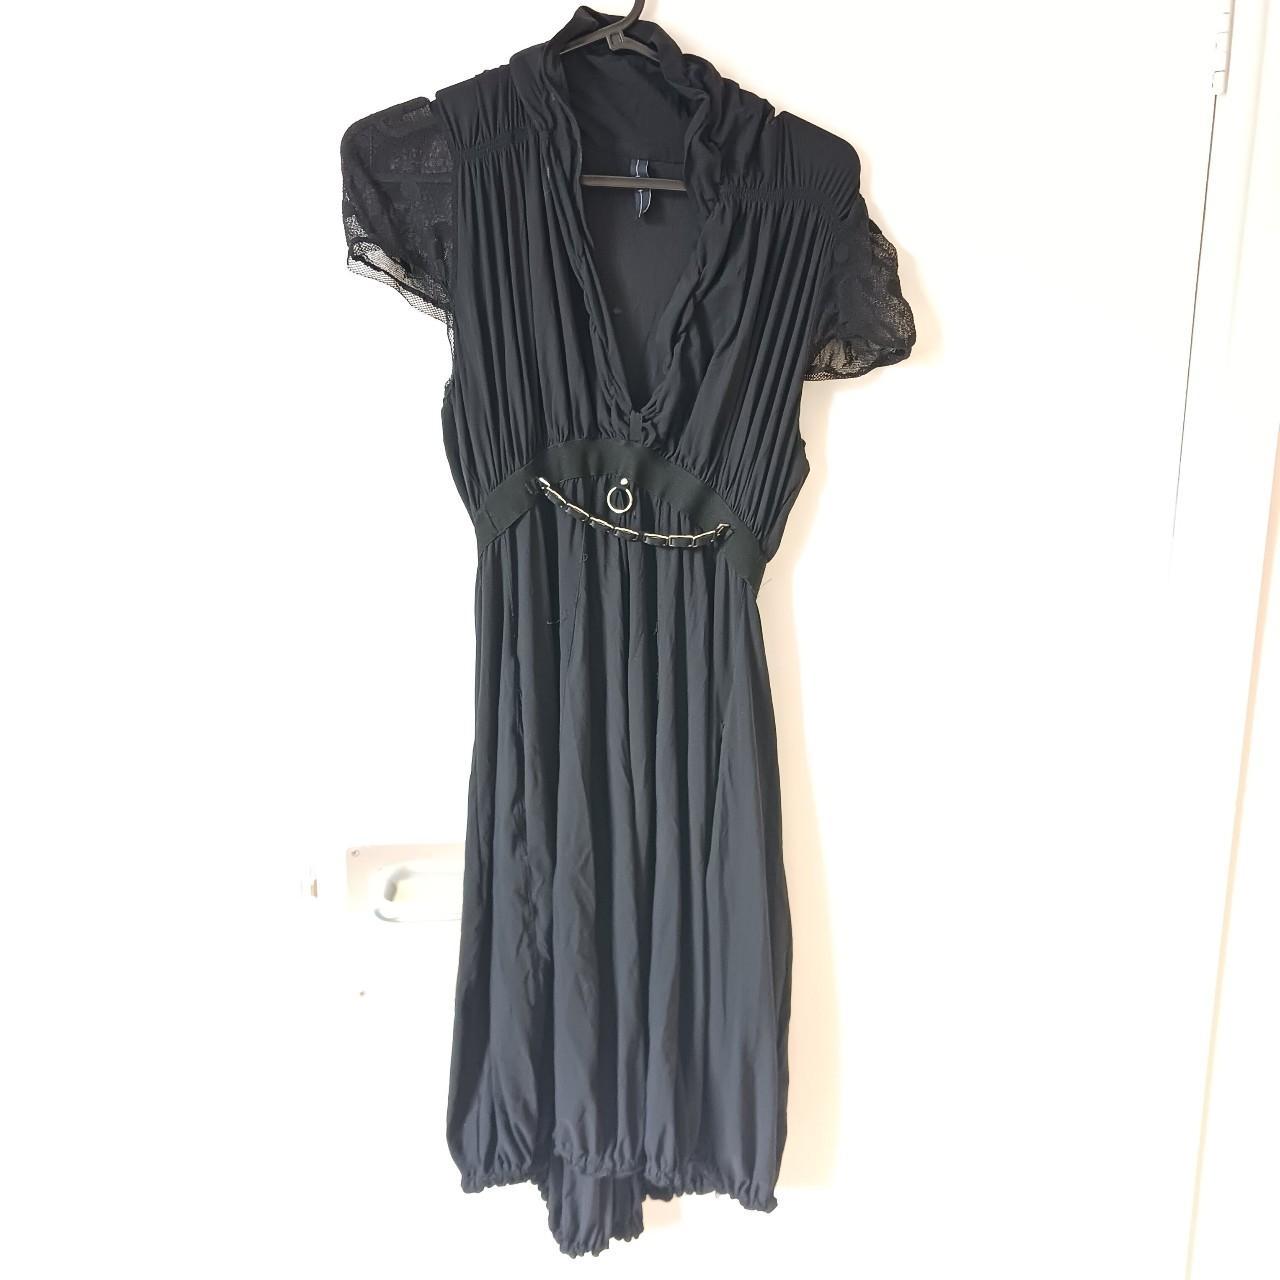 Amazing Gothic dress, knee/mid thigh length with... - Depop